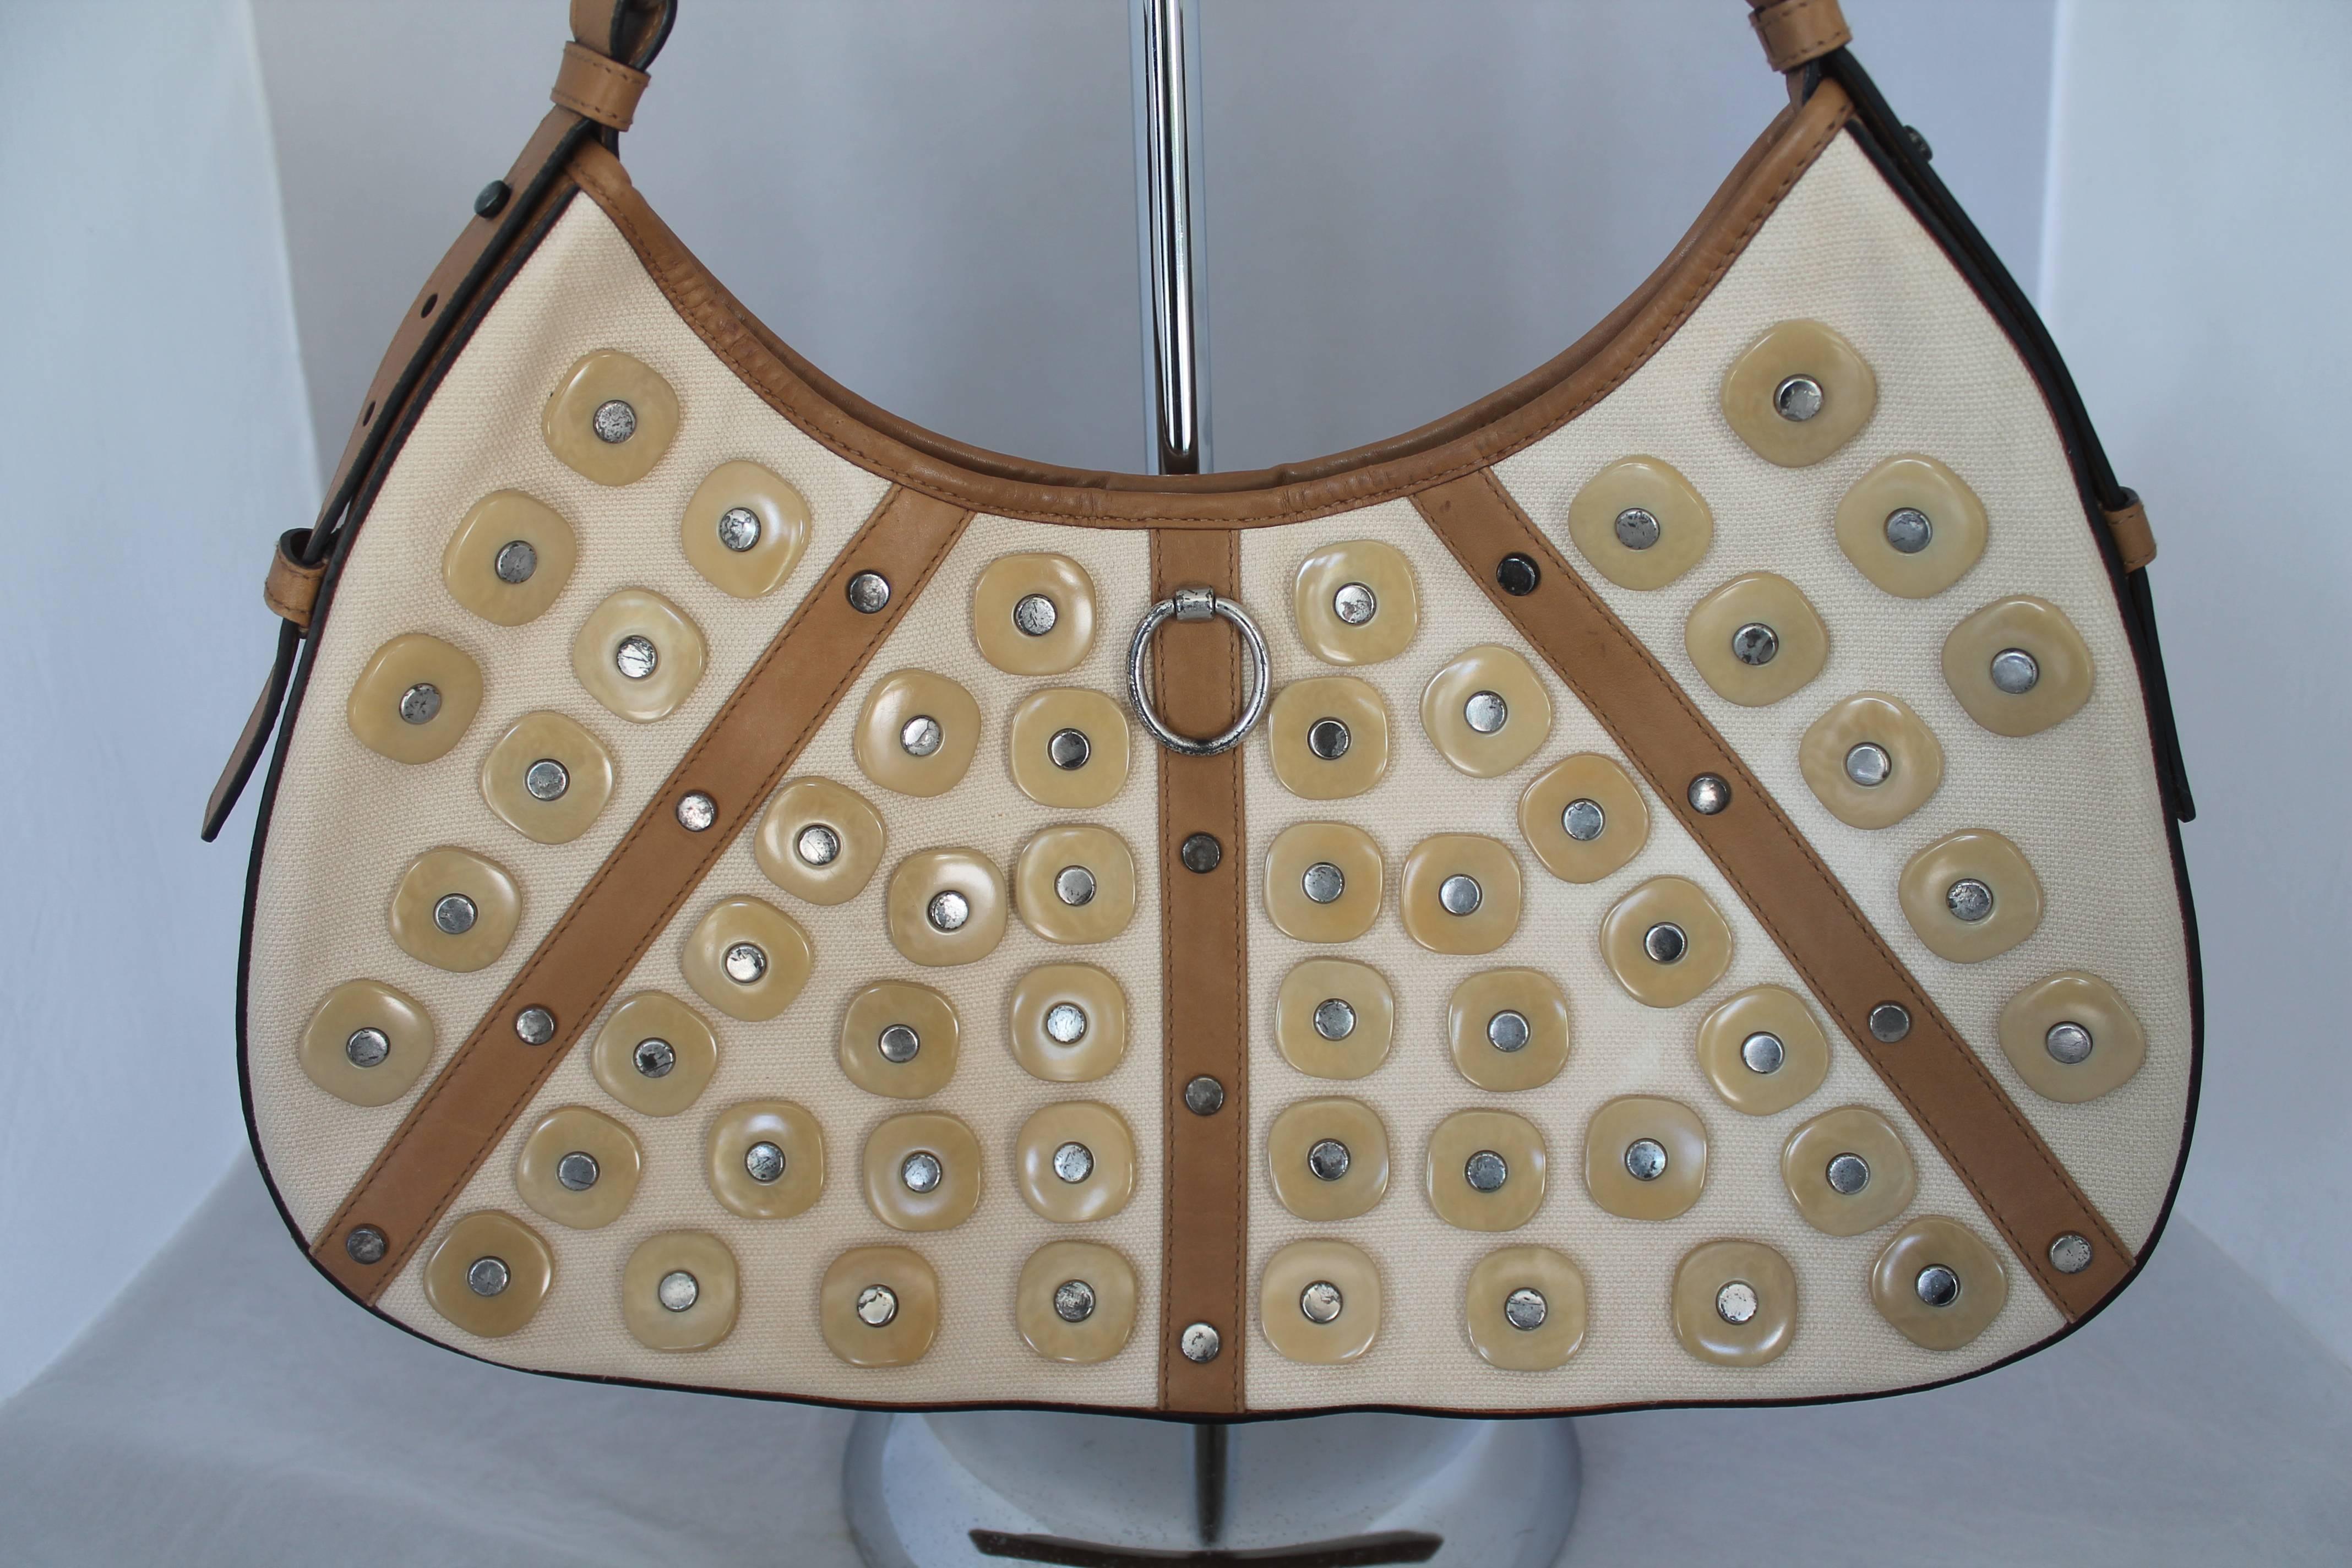 Yves Saint Laurent Beige Canvas Shoulder Bag w/ Enamel & Silver Studs. It also has luggage color and leather trim and handle. This bag is in fair condition. It has staining on the back of the bag, the paint on the silver studs is chipped, the